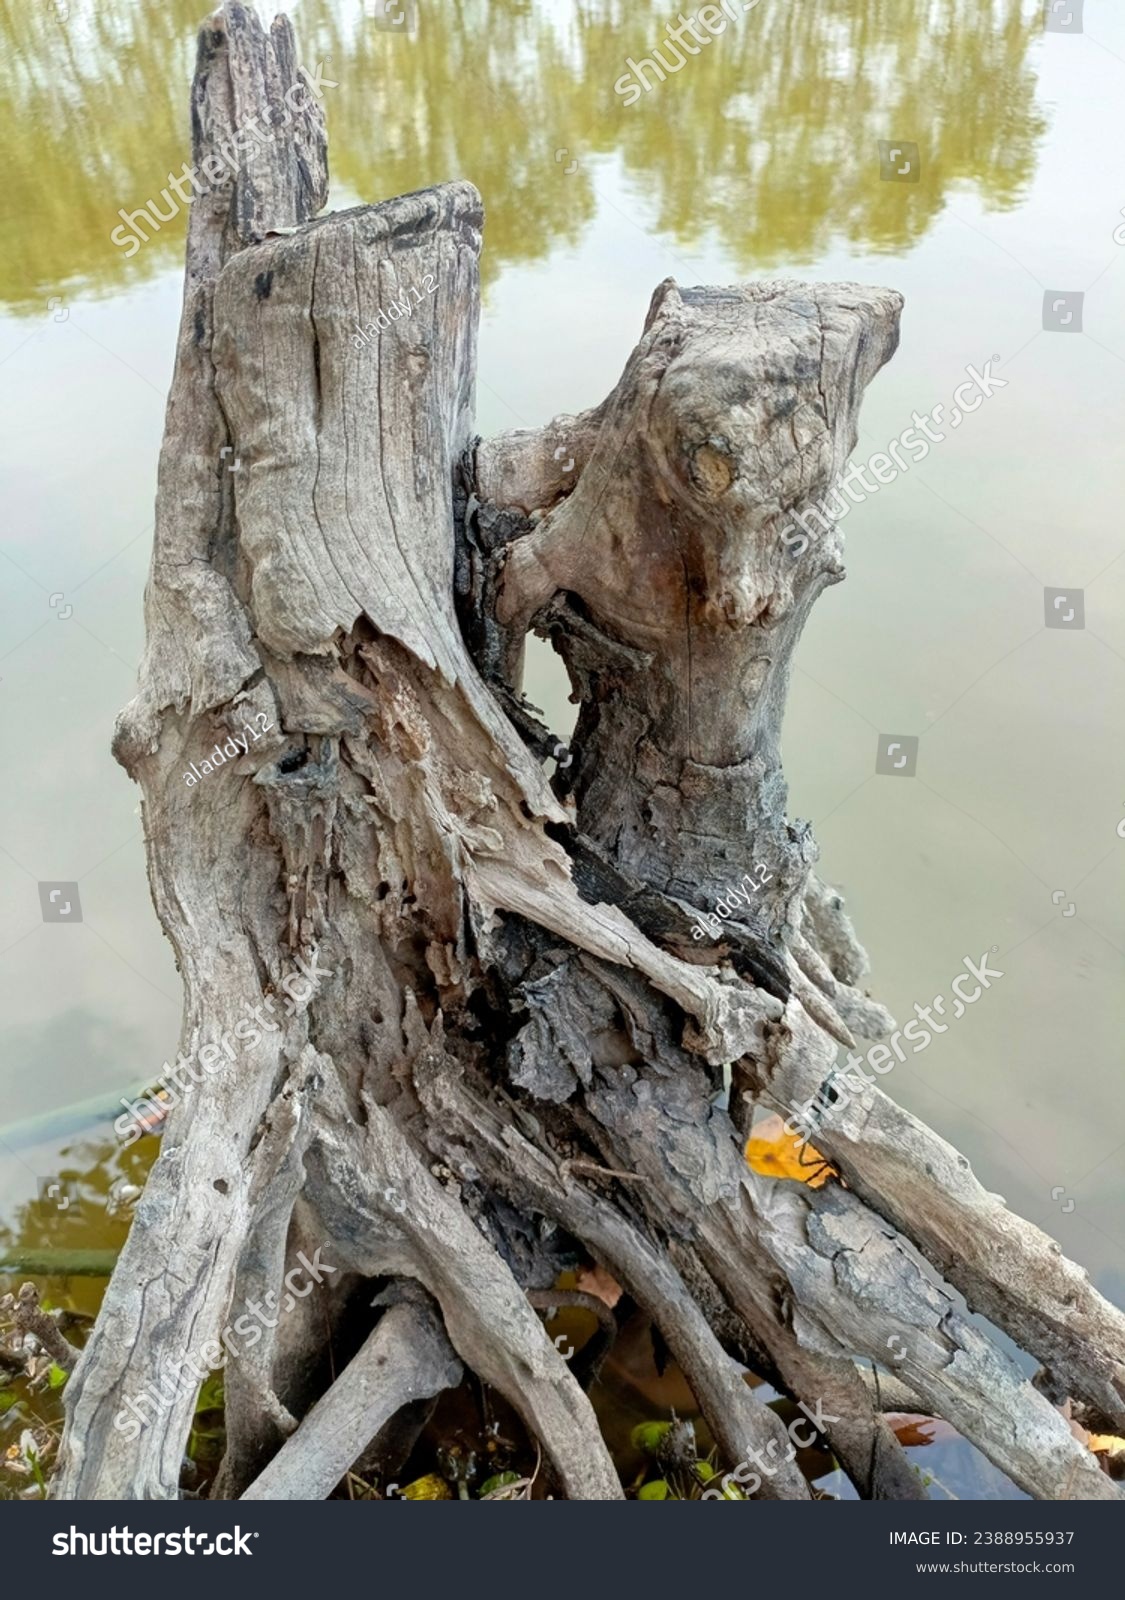 The image shows a tree stump sitting next to a body of water. The stump is large and round, with a diameter of about 2 feet. The bark is peeling off in large flakes.  #2388955937